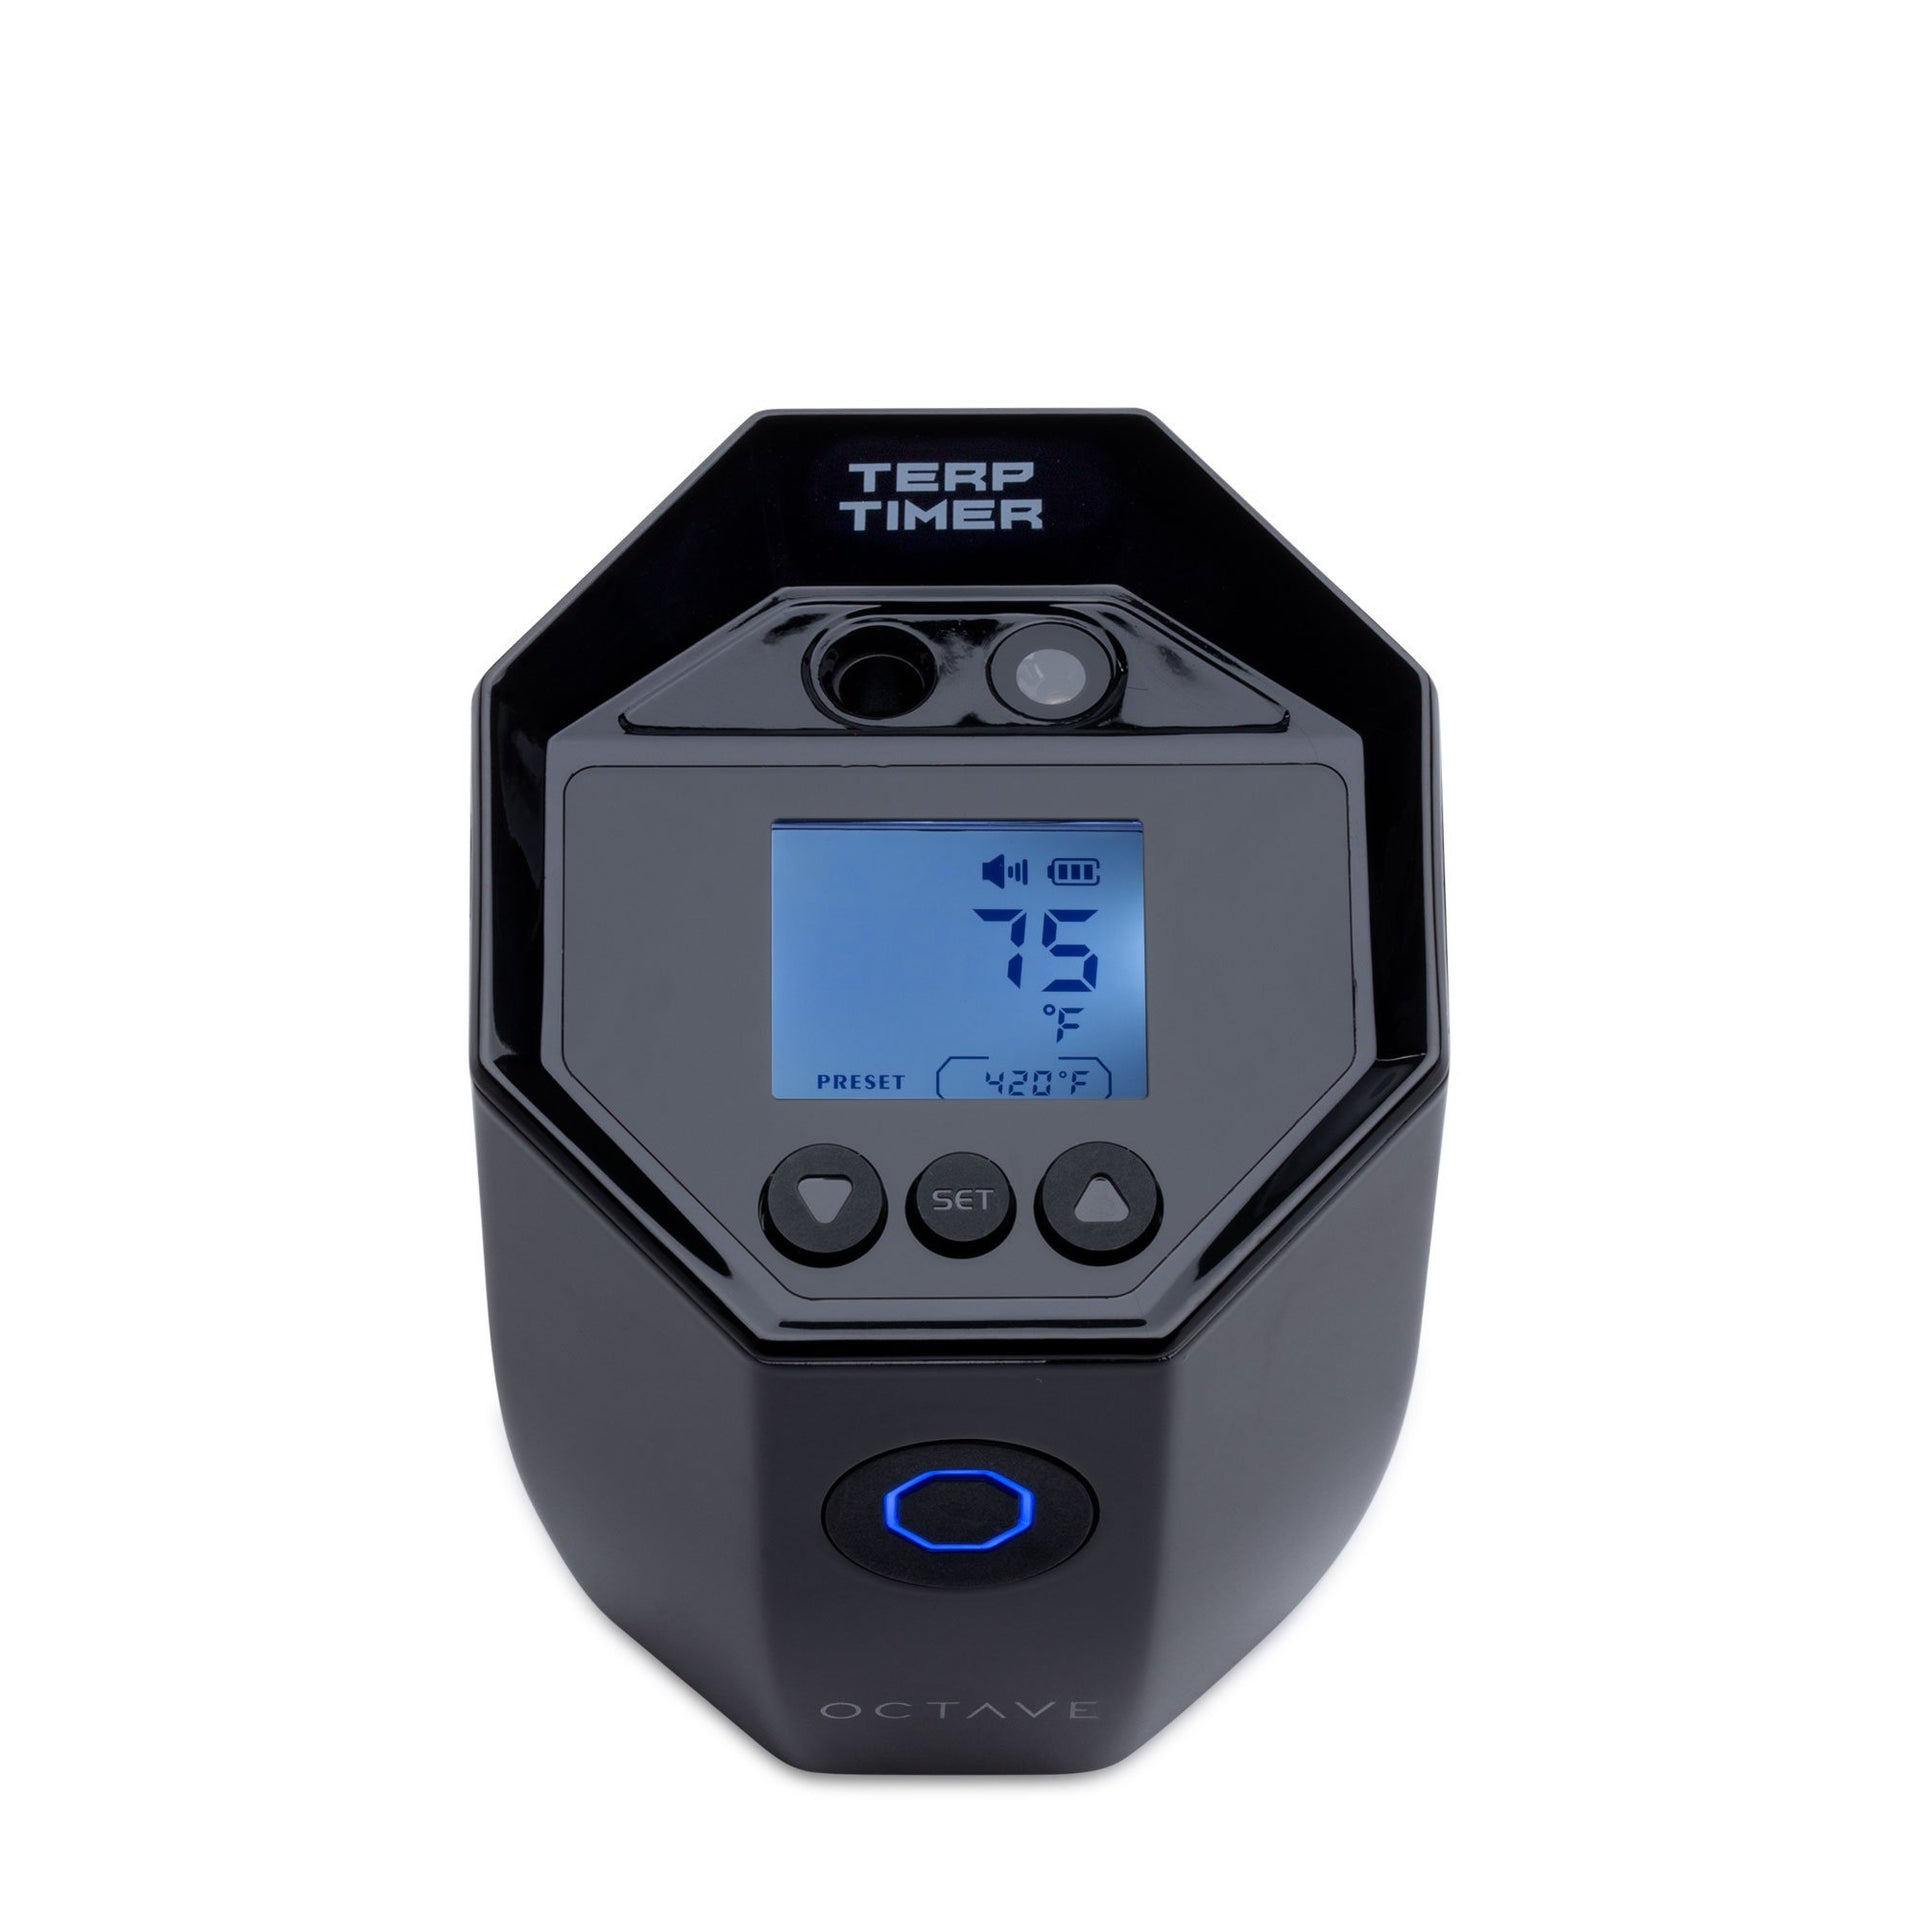 Octave Terp Timer Digital Thermometer